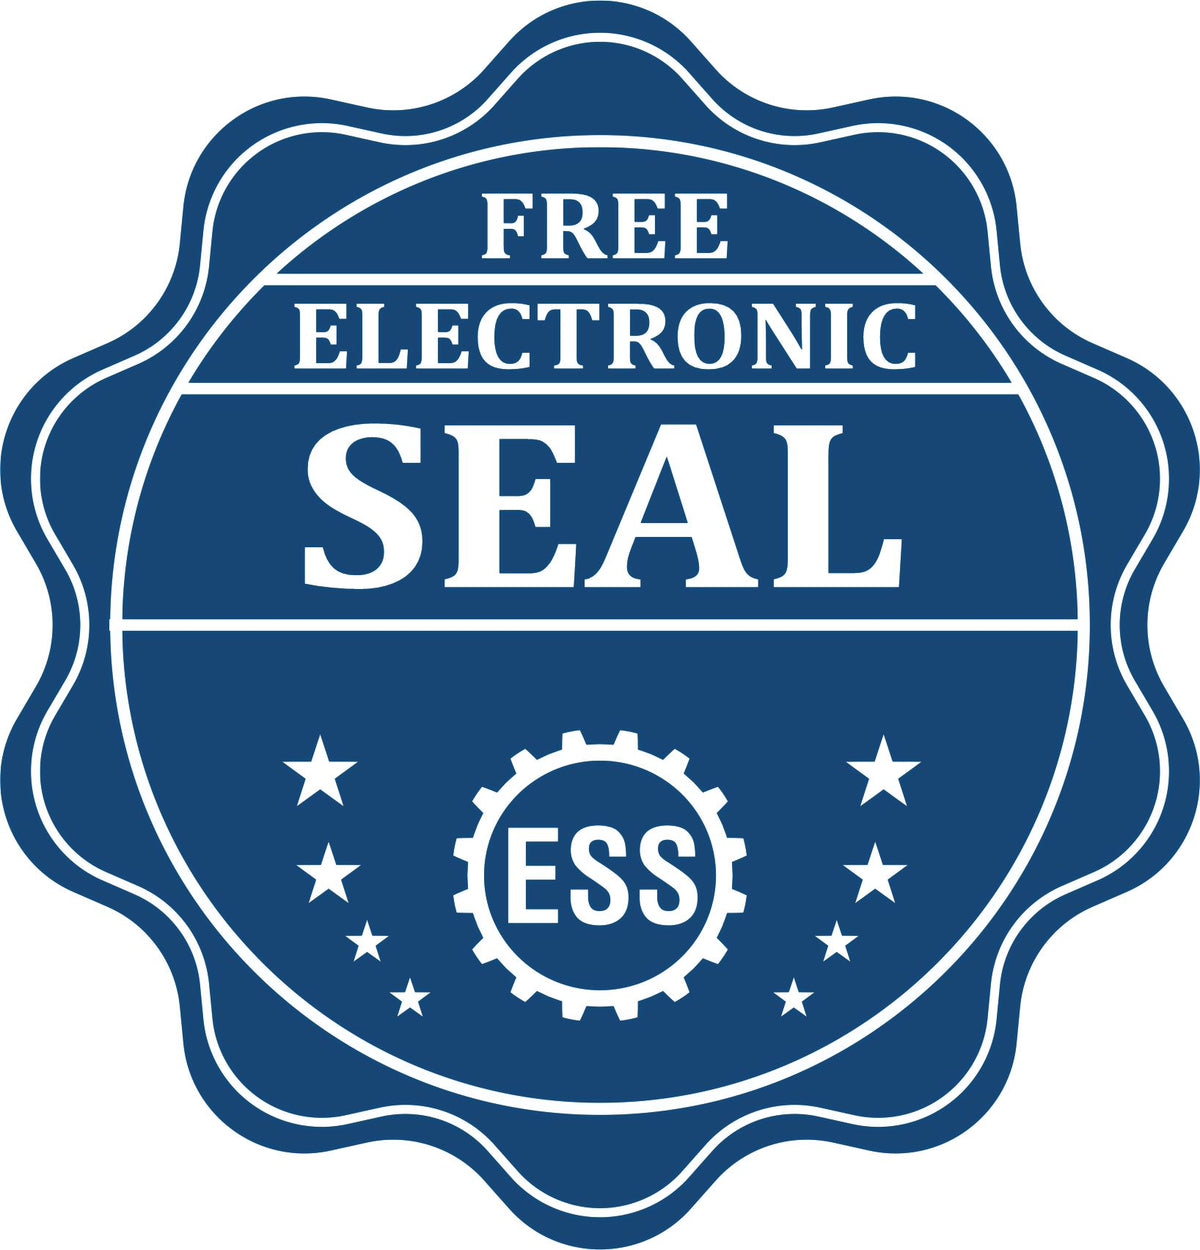 A badge showing a free electronic seal for the MaxLight Premium Pre-Inked Maine State Seal Notarial Stamp with stars and the ESS gear on the emblem.